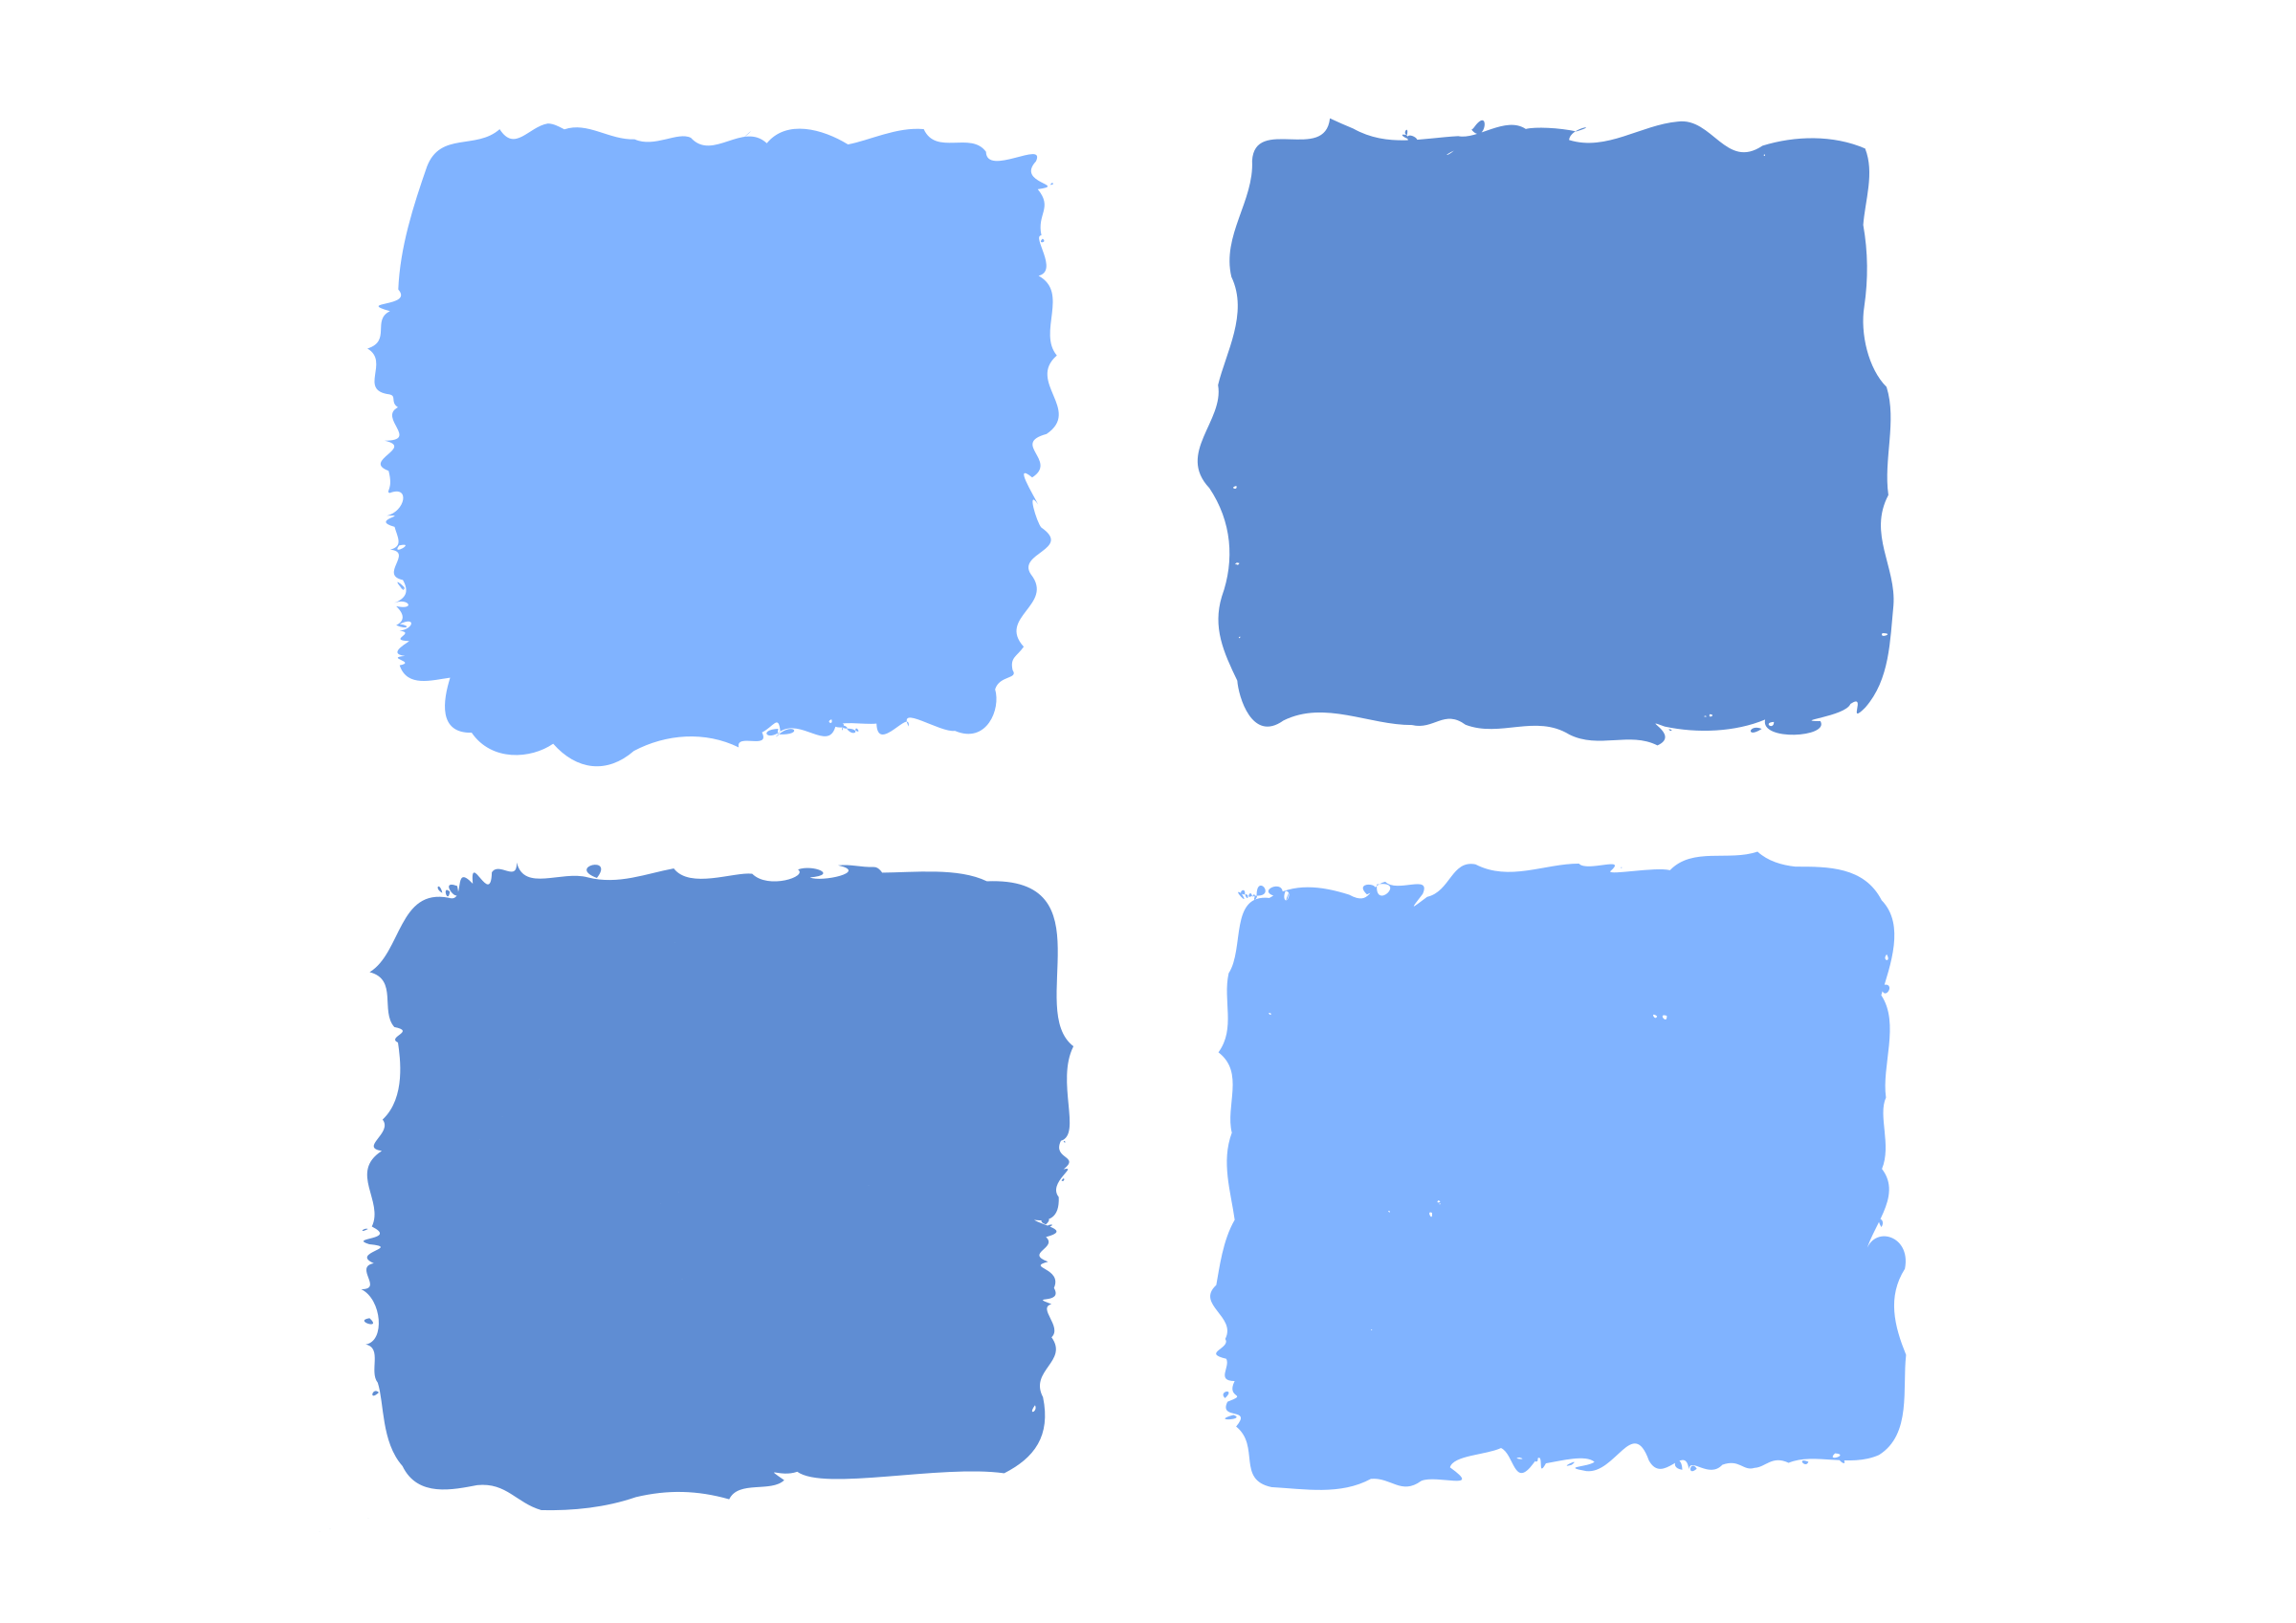 1 clipart blue, 1 blue Transparent FREE for download on.